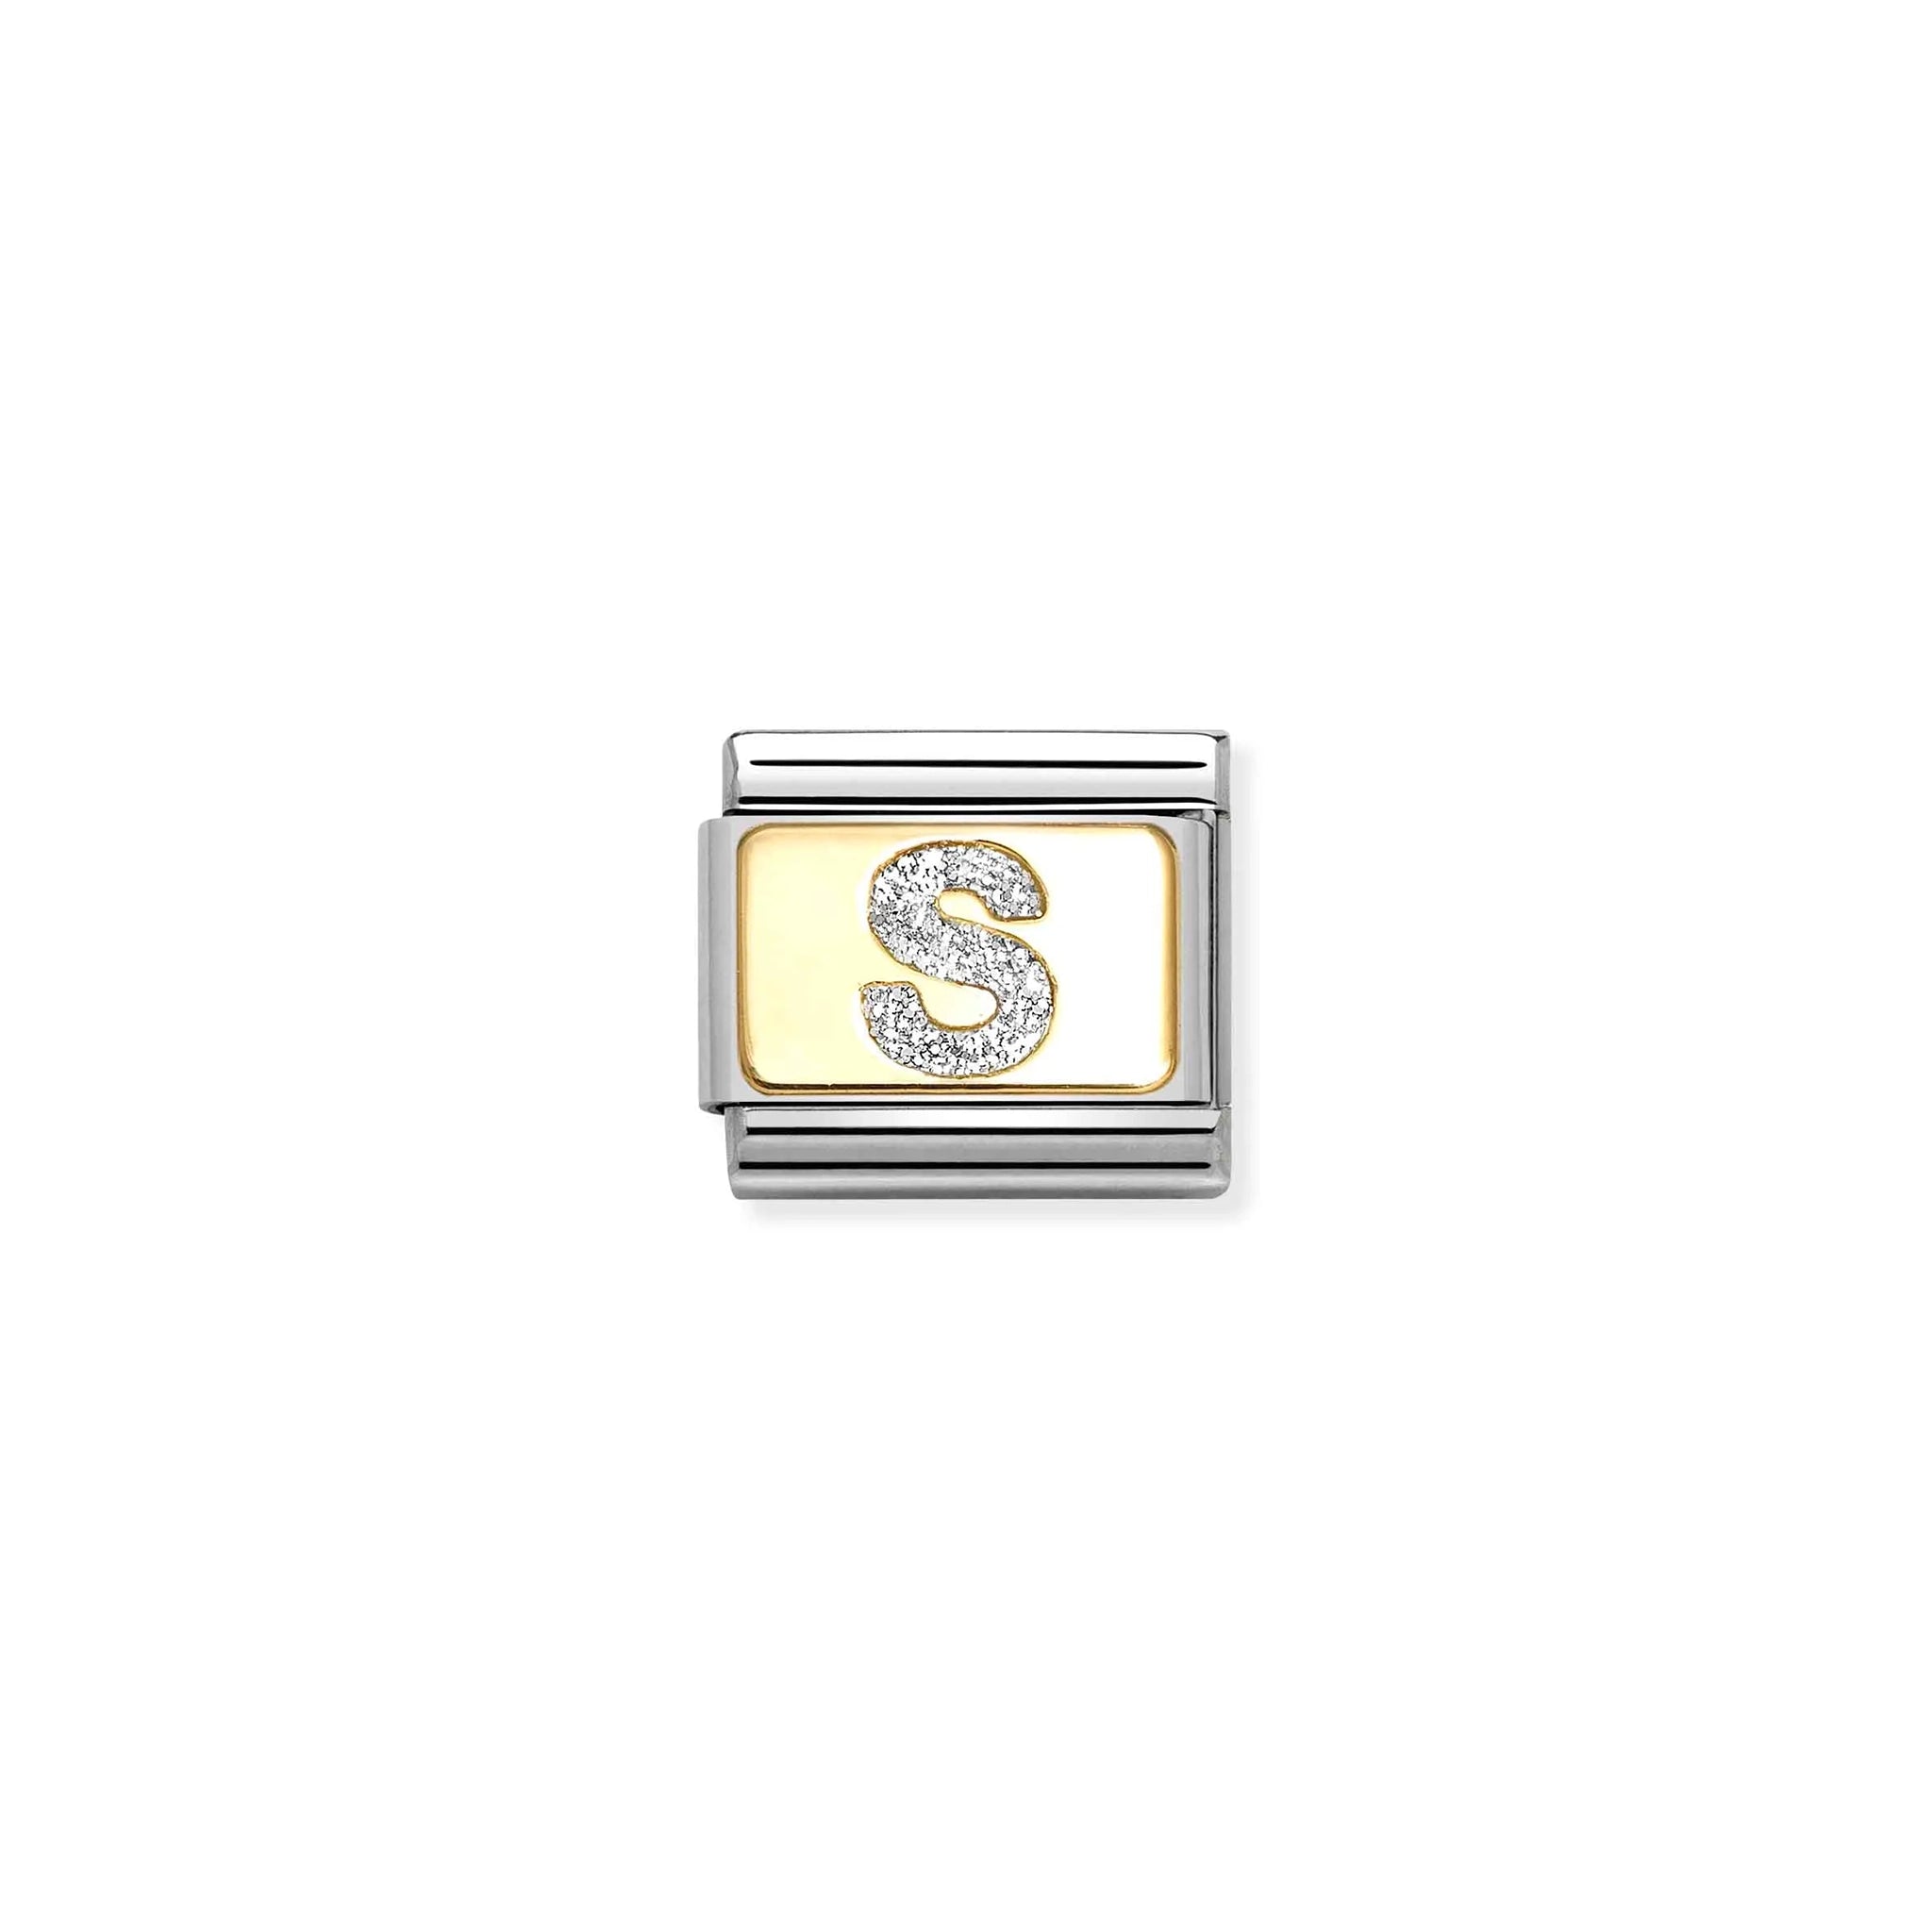 Nomination charm link featuring a gold plaque with a silver glitter letter S